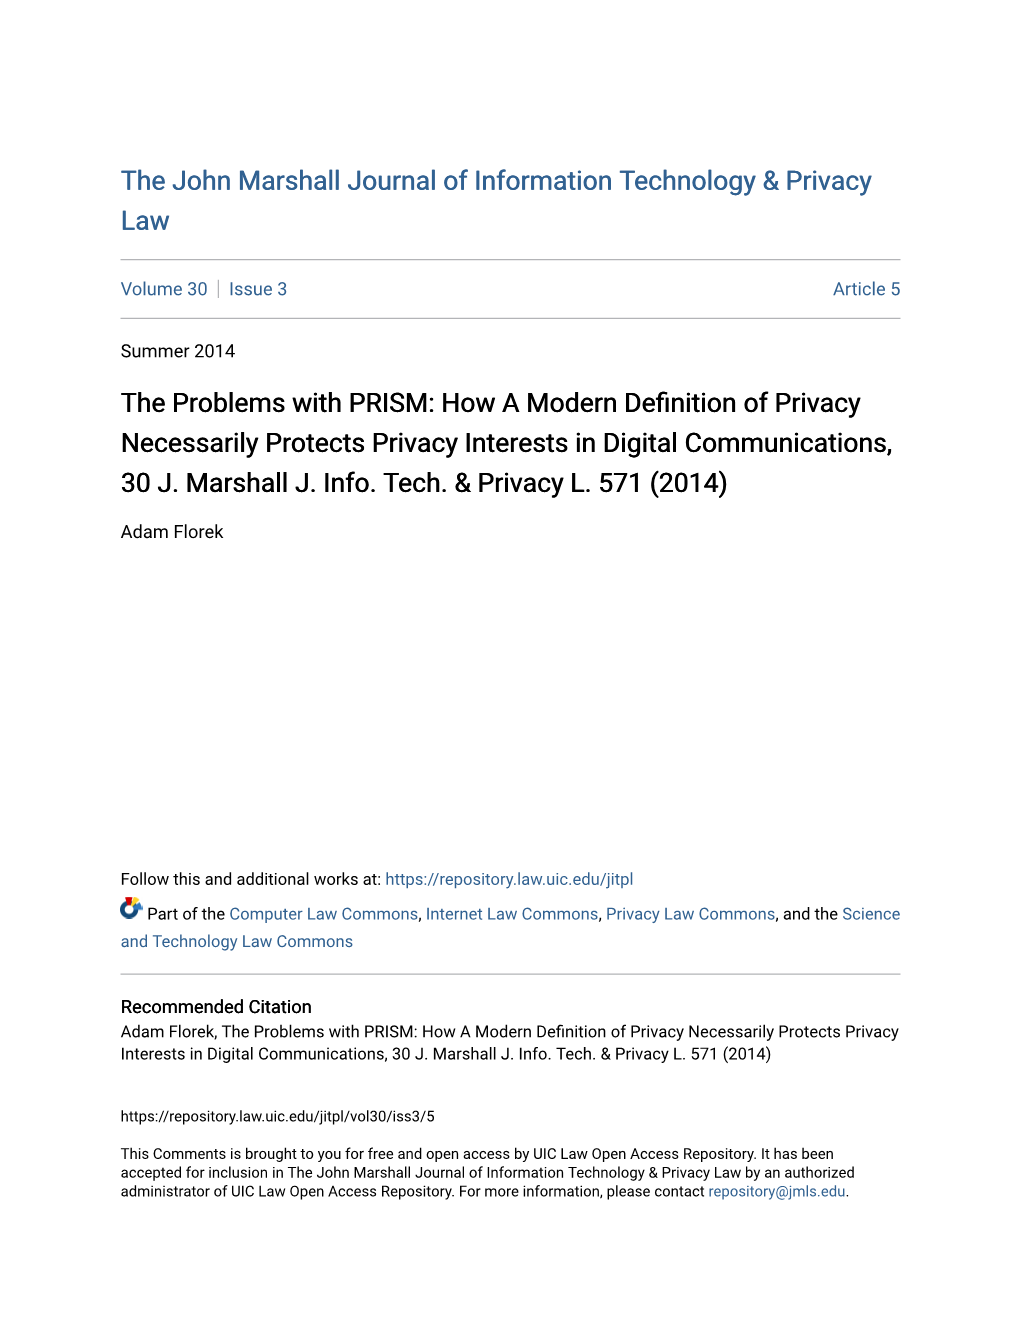 The Problems with PRISM: How a Modern Definition of Privacy Necessarily Protects Privacy Interests in Digital Communications, 30 J